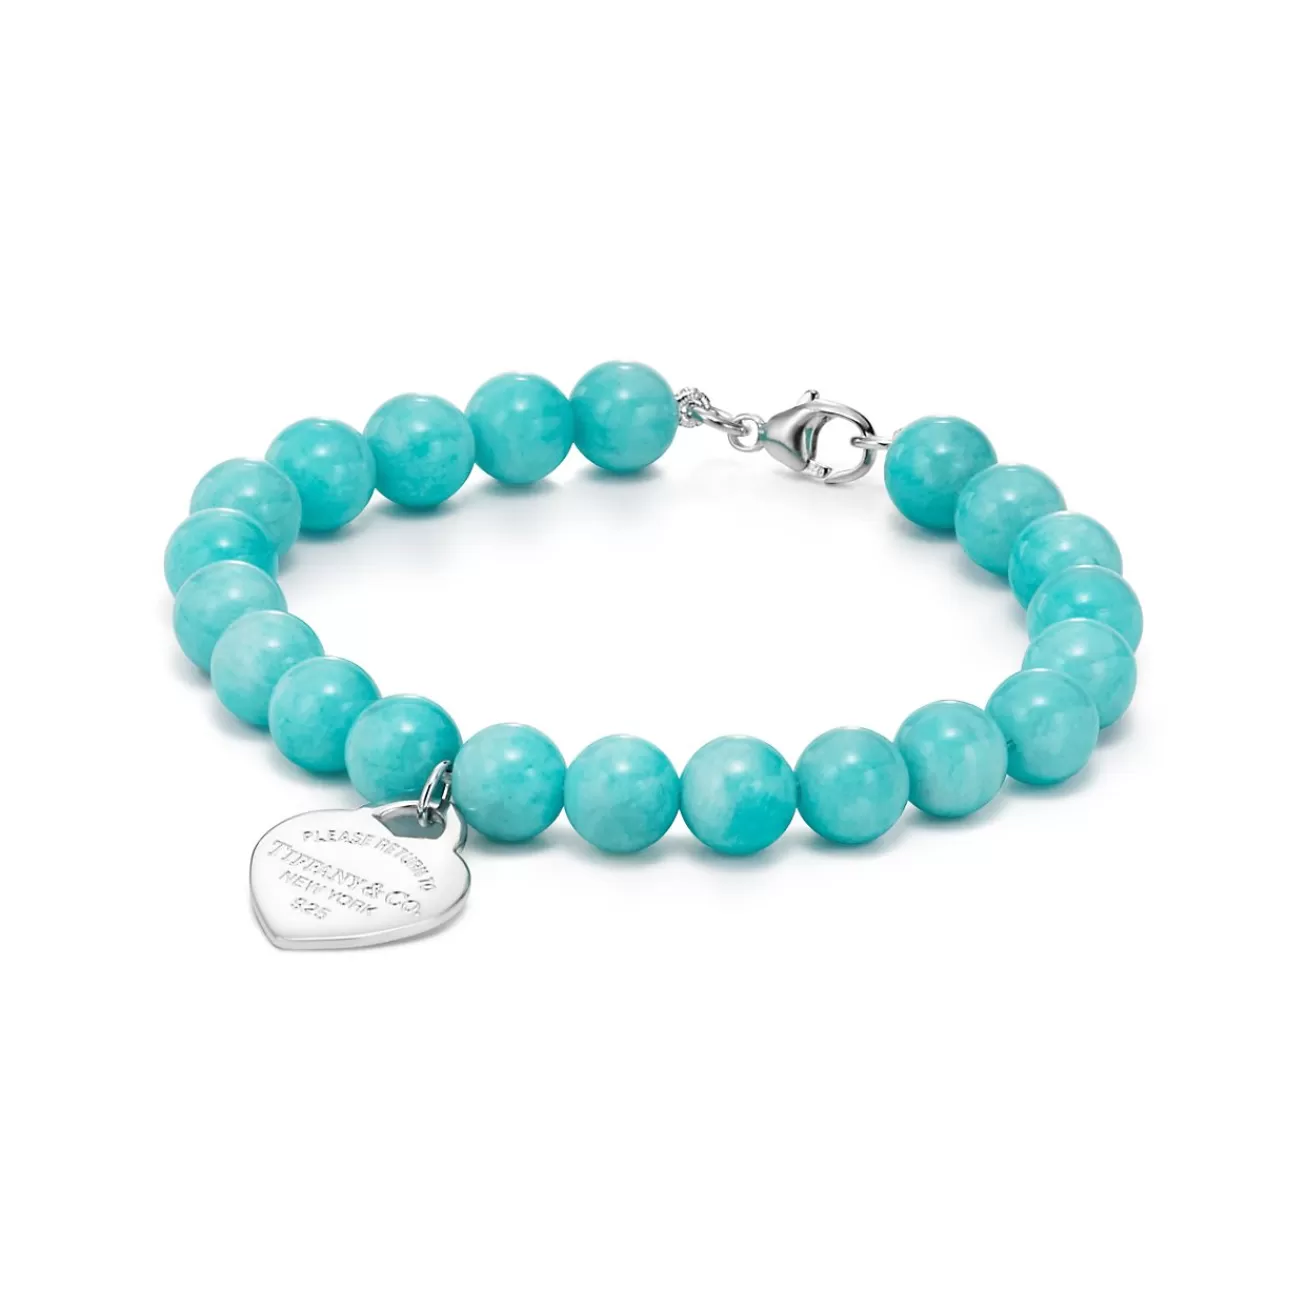 Tiffany & Co. Return to Tiffany® Heart Tag Bead Bracelet in Silver with Amazonite, 8 mm | ^ Bracelets | Sterling Silver Jewelry